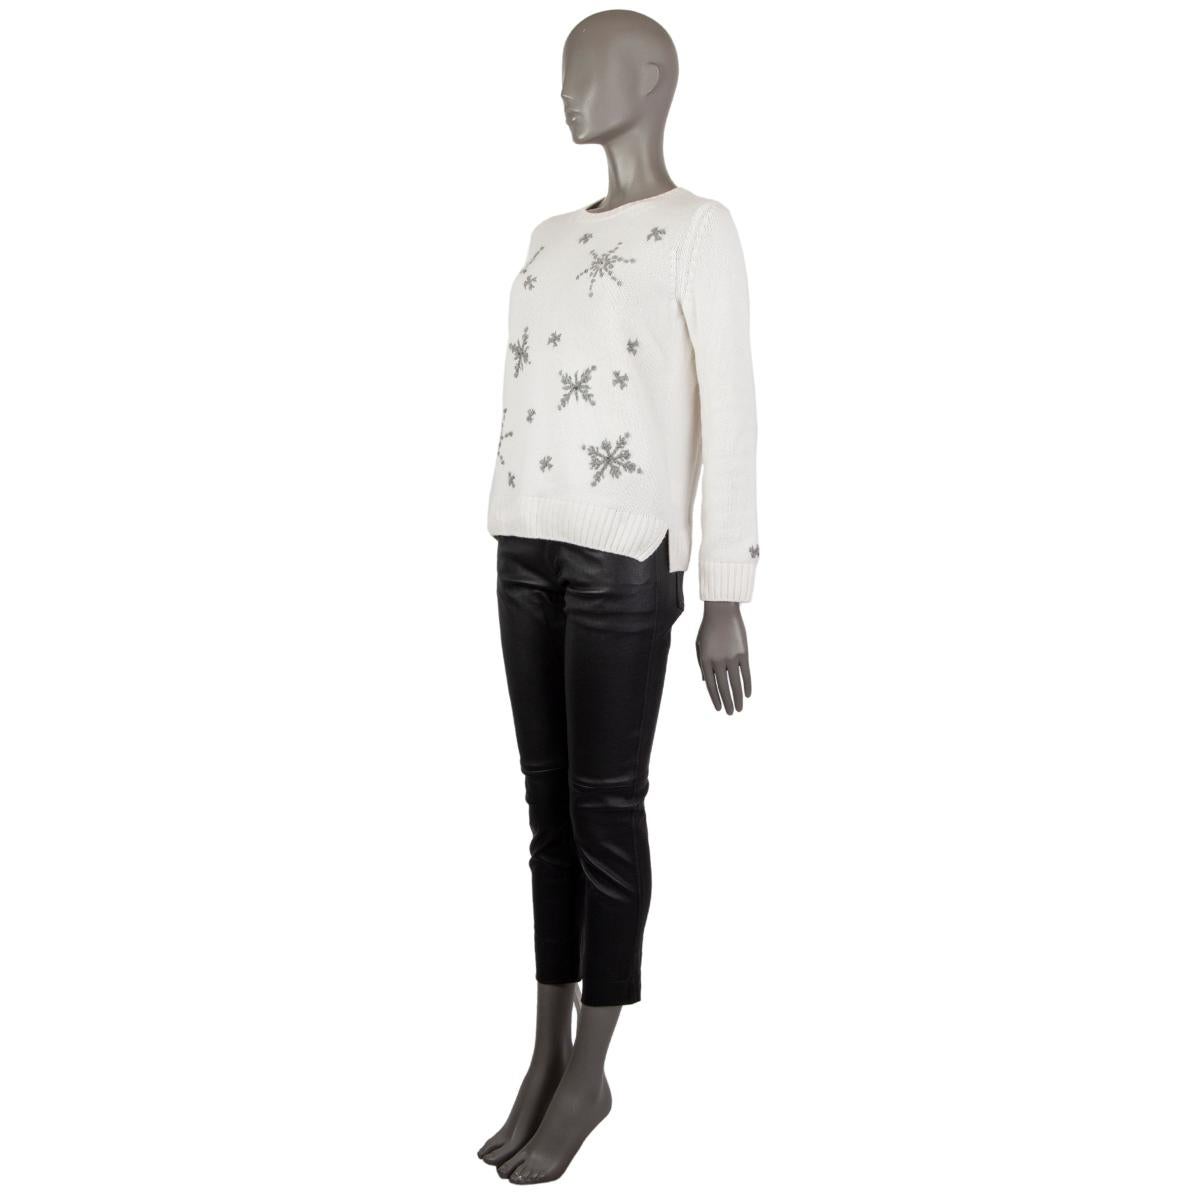 Loro Piana snowflake with crystal embellished sweater in off-white and grey cashmere (100%) with a round neck. Unlined. Has been worn and is in excellent condition. 

Tag Size 40
Size S
Shoulder Width 39cm (15.2in)
Bust 90cm (35.1in) to 94cm